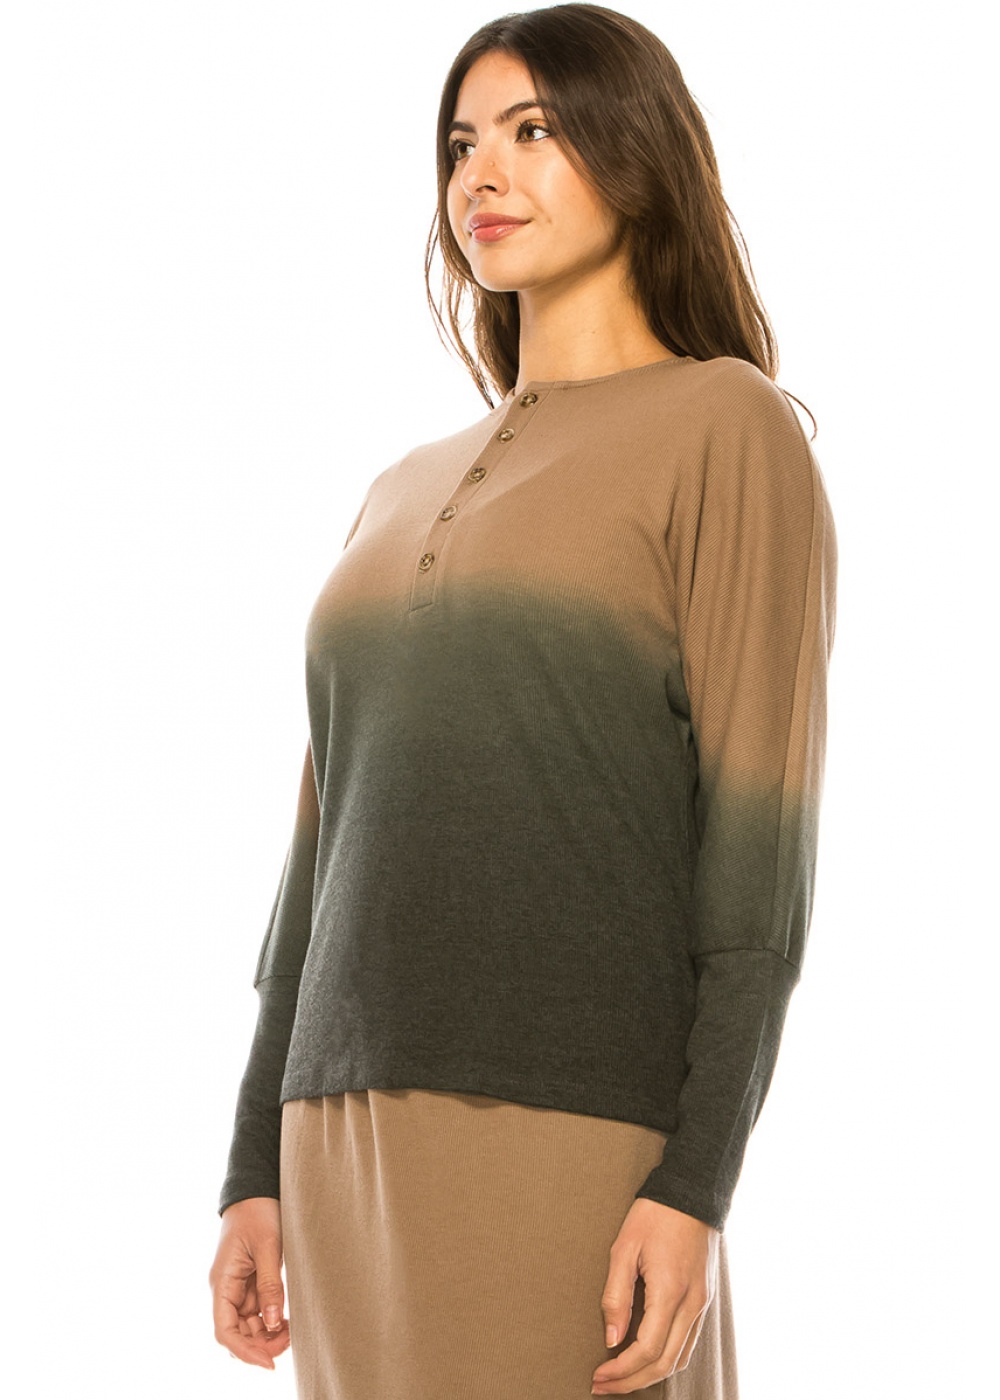 Crew Neck Long Sleeve T-Shirt In Camel